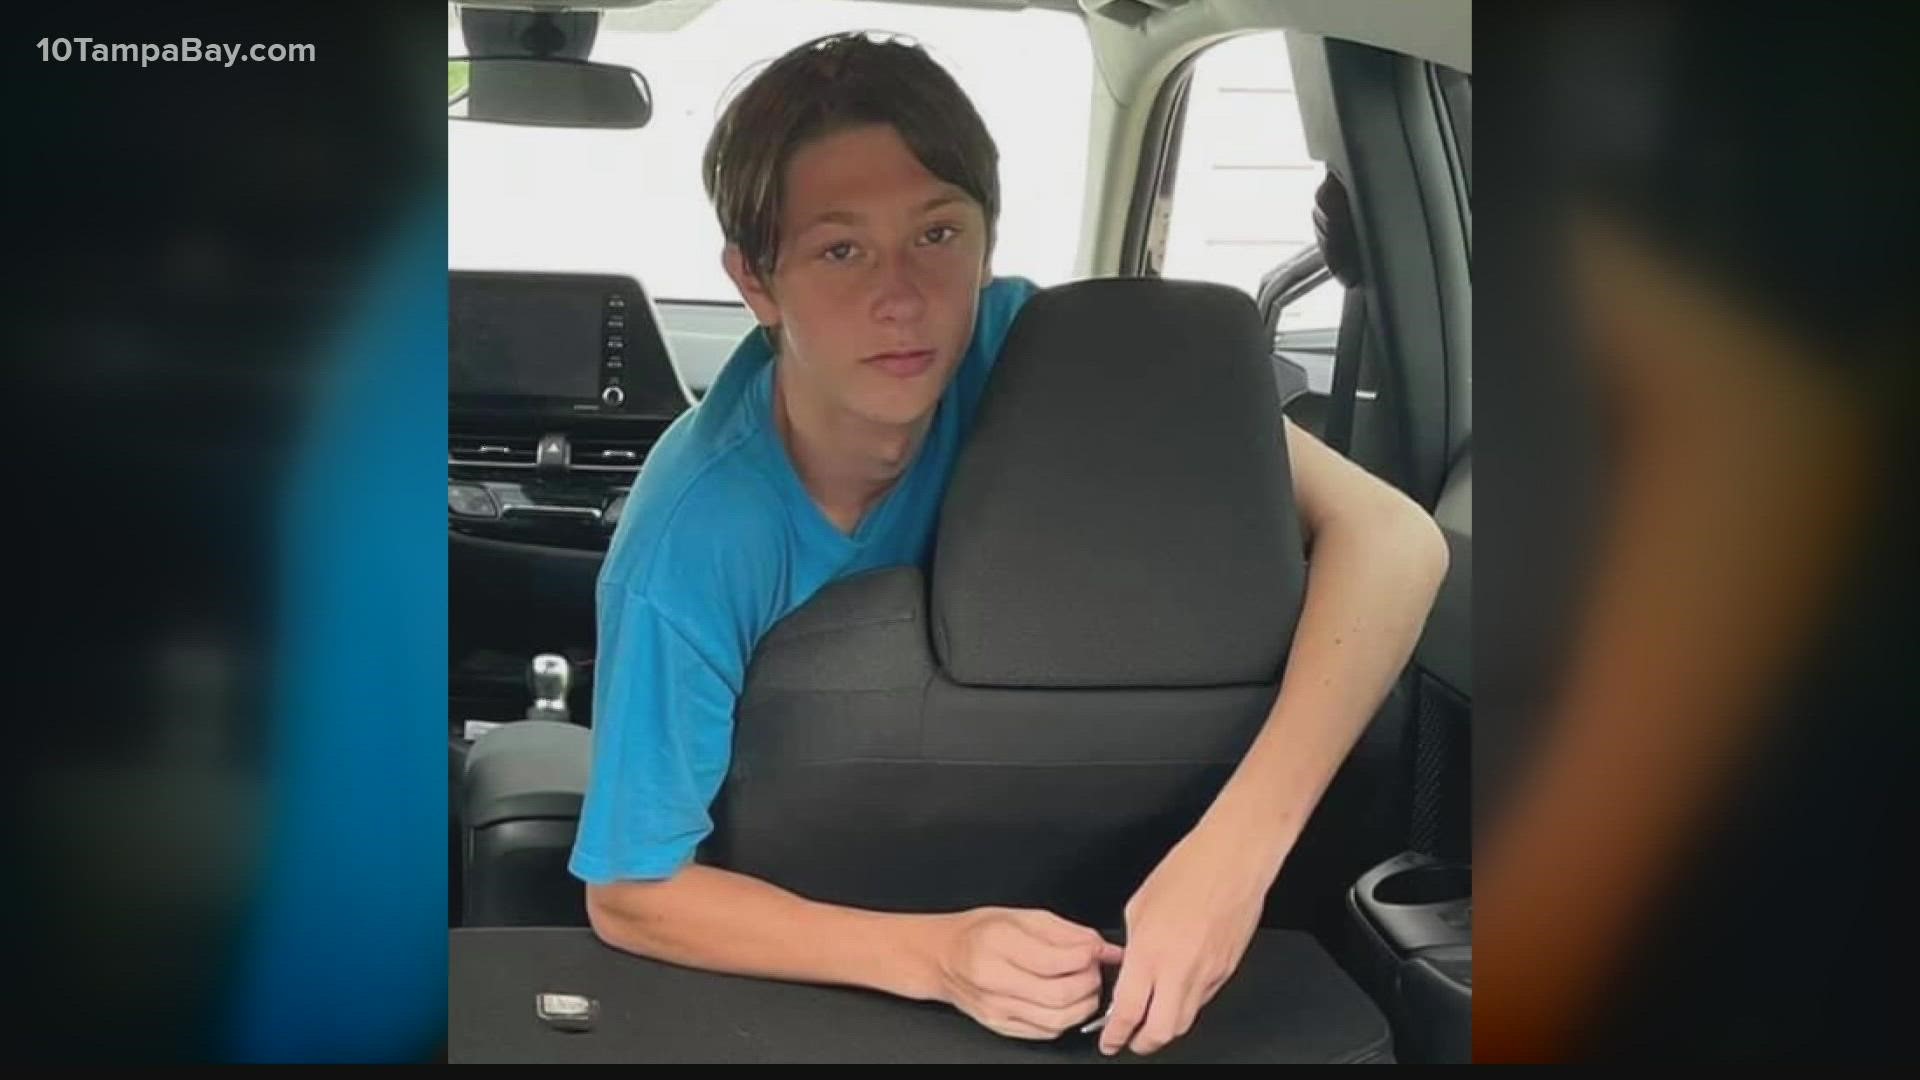 The Orange County Sheriff’s Office reported him as a missing juvenile runaway.